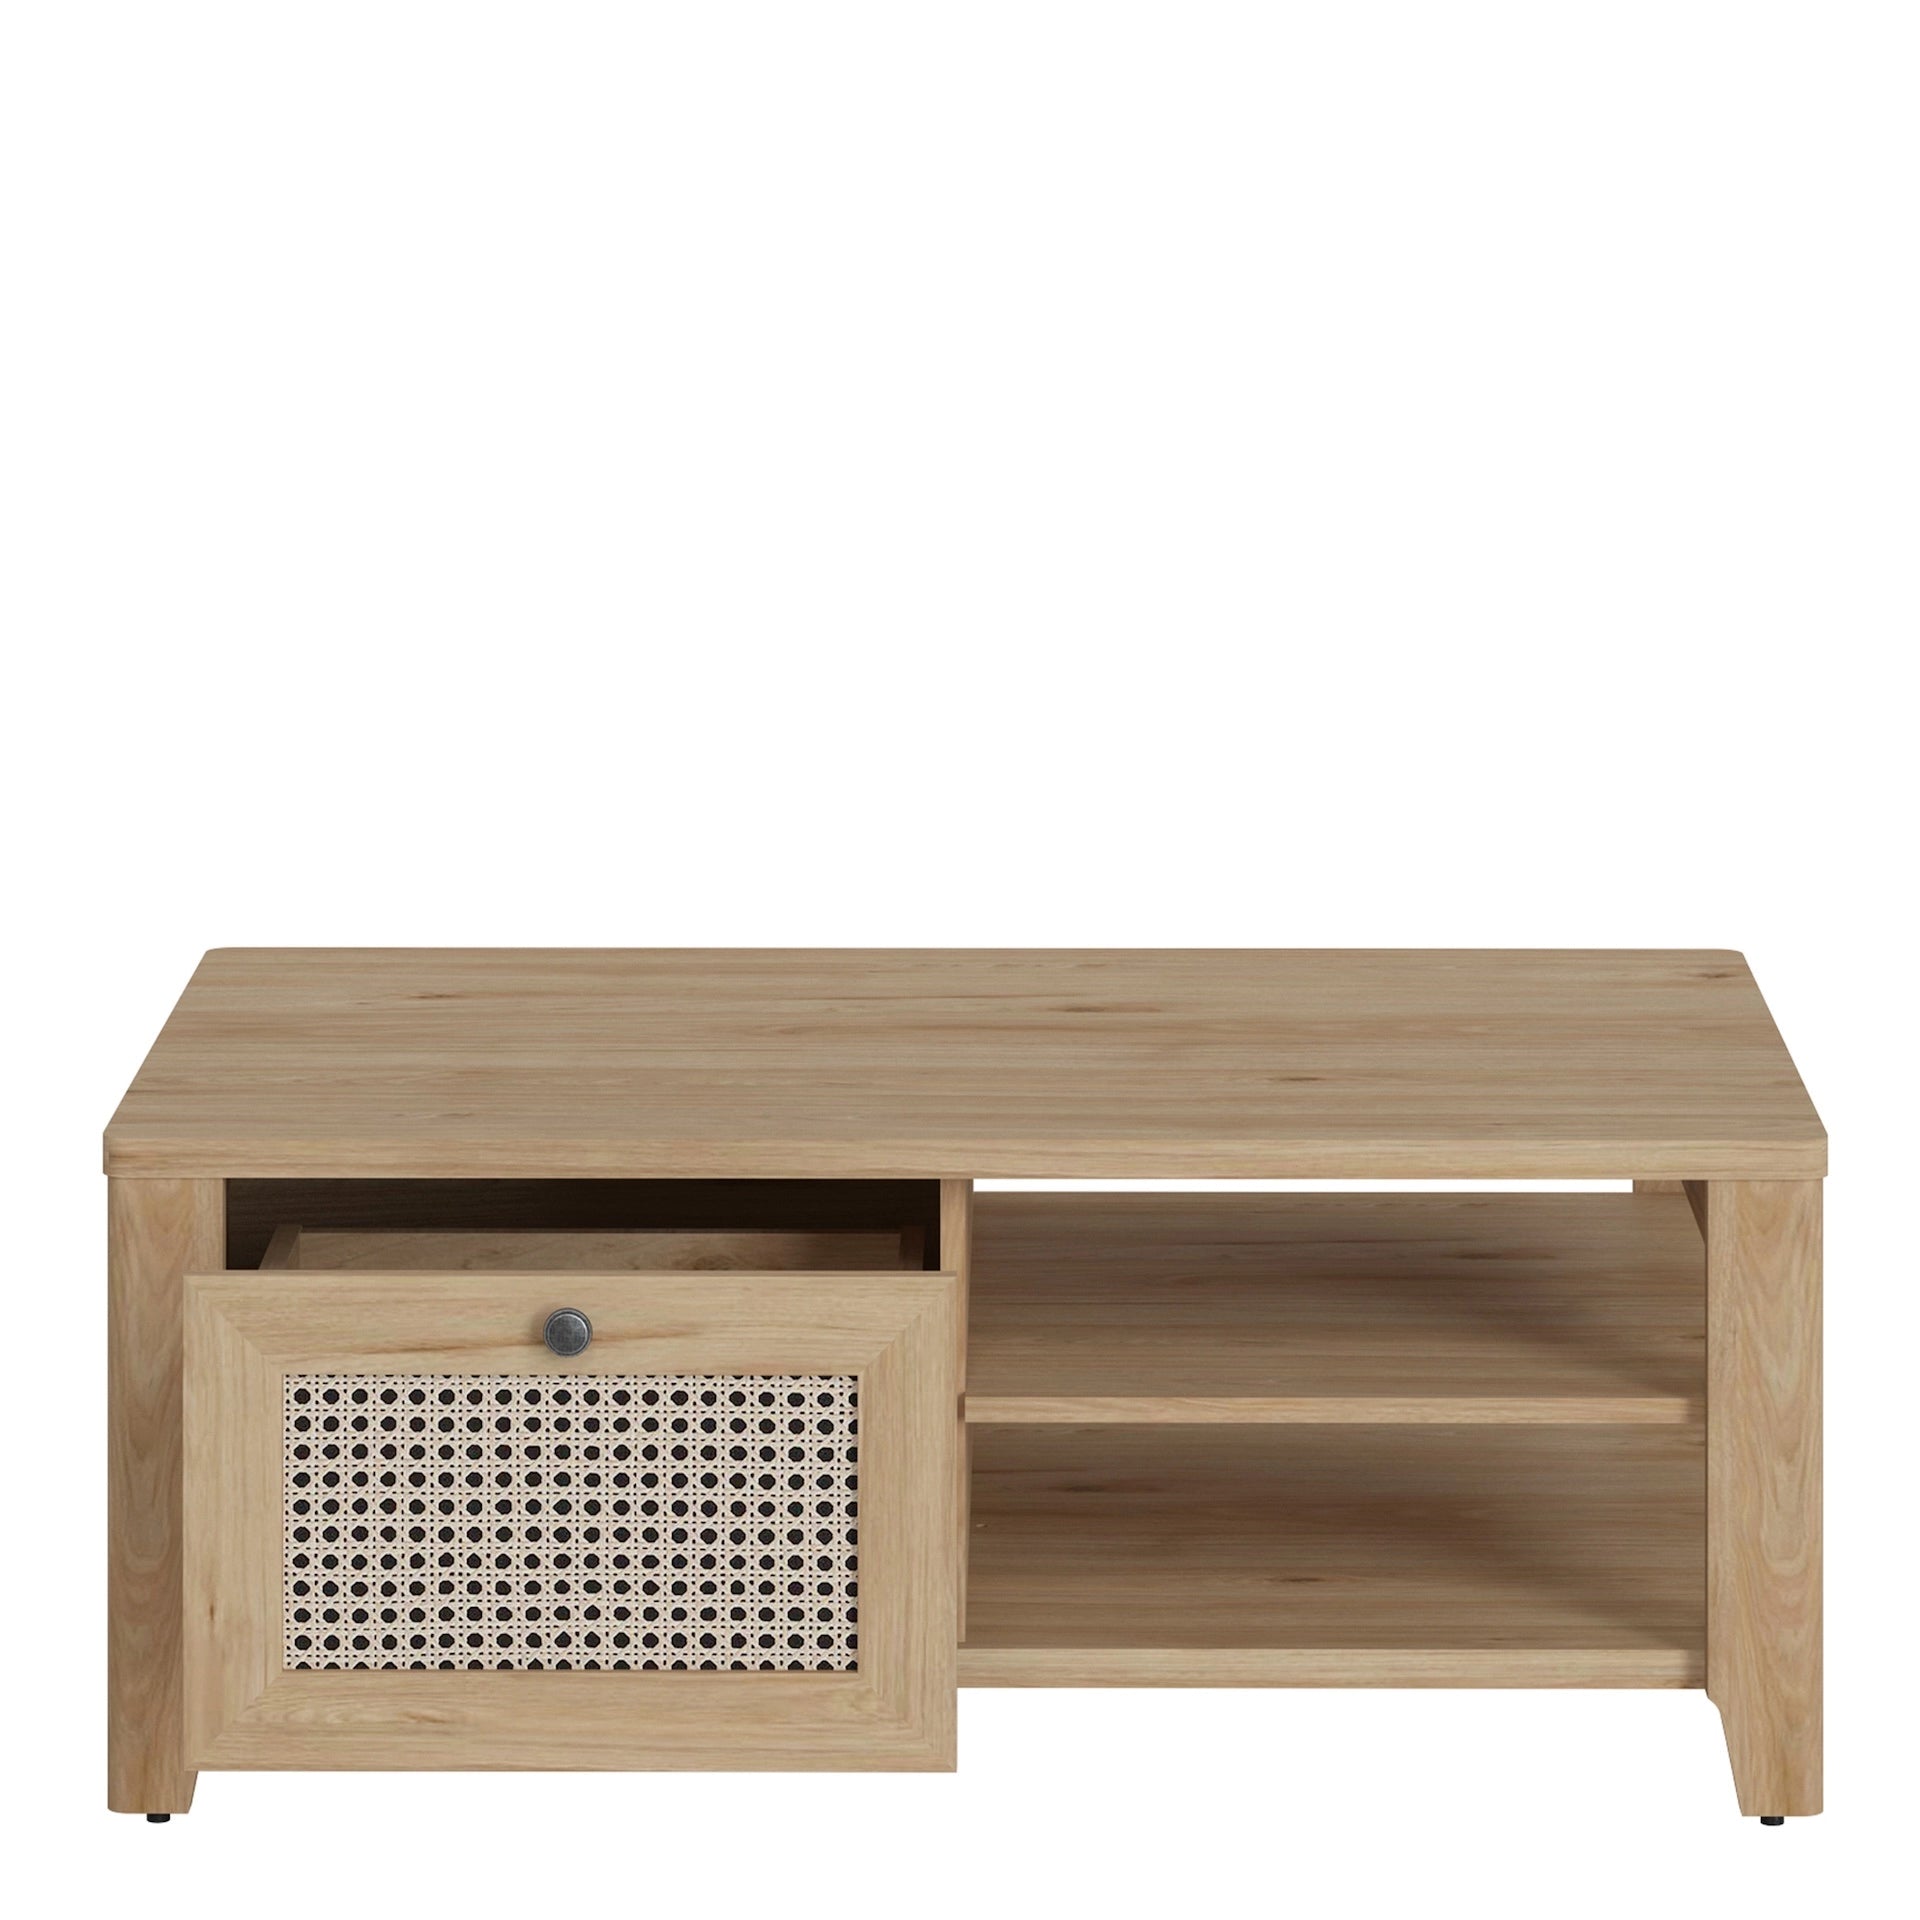 Furniture To Go Cestino Coffee Table with 1 Drawer in Jackson Hickory Oak & Rattan Effect